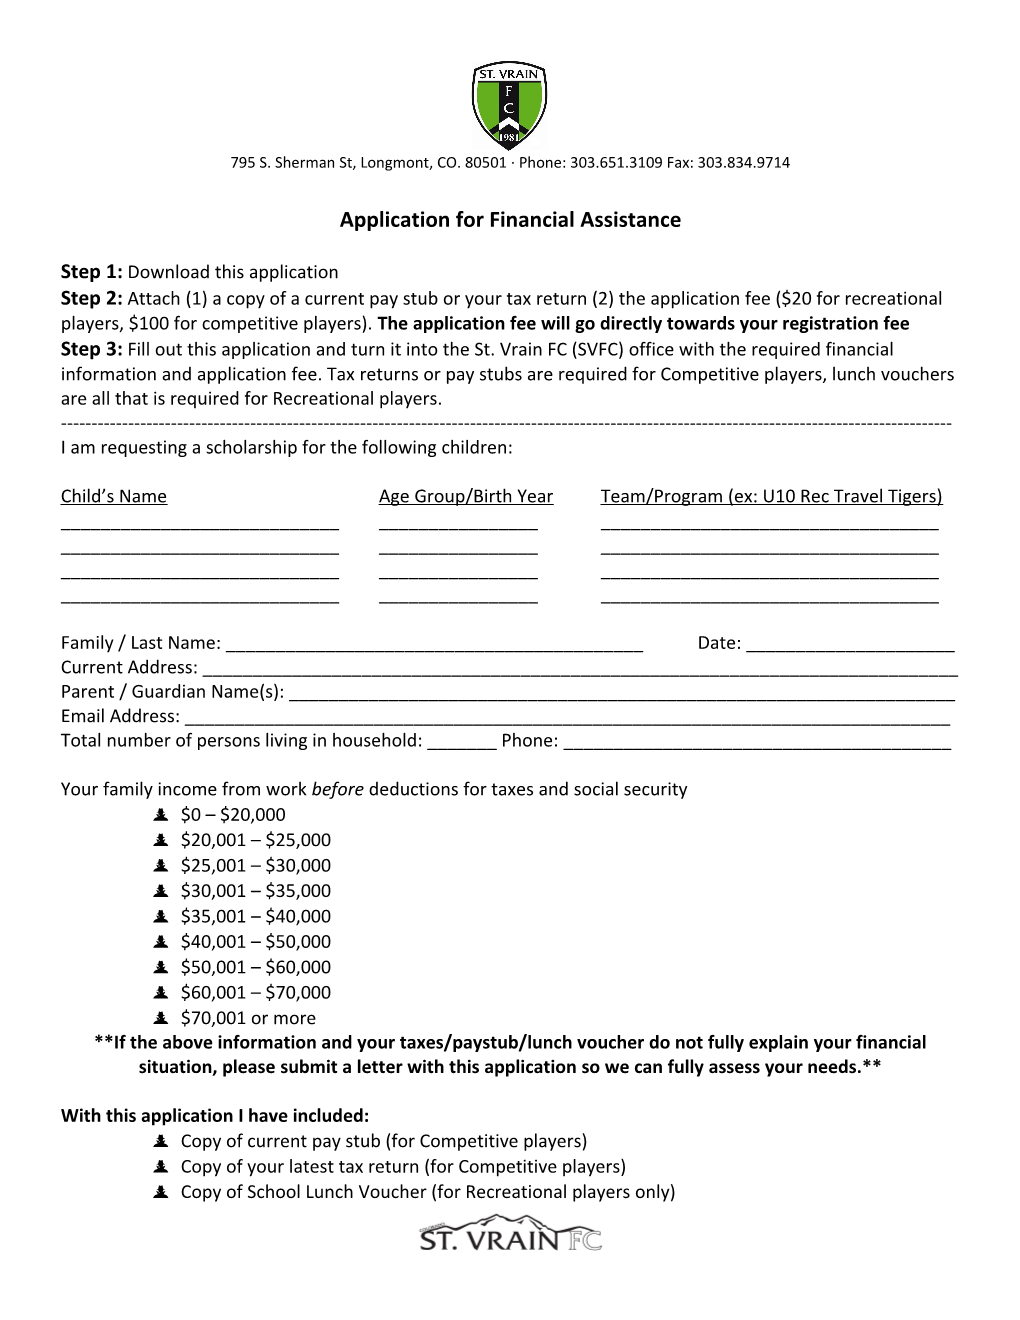 Application for Community Sailing of Colorado Scholarships